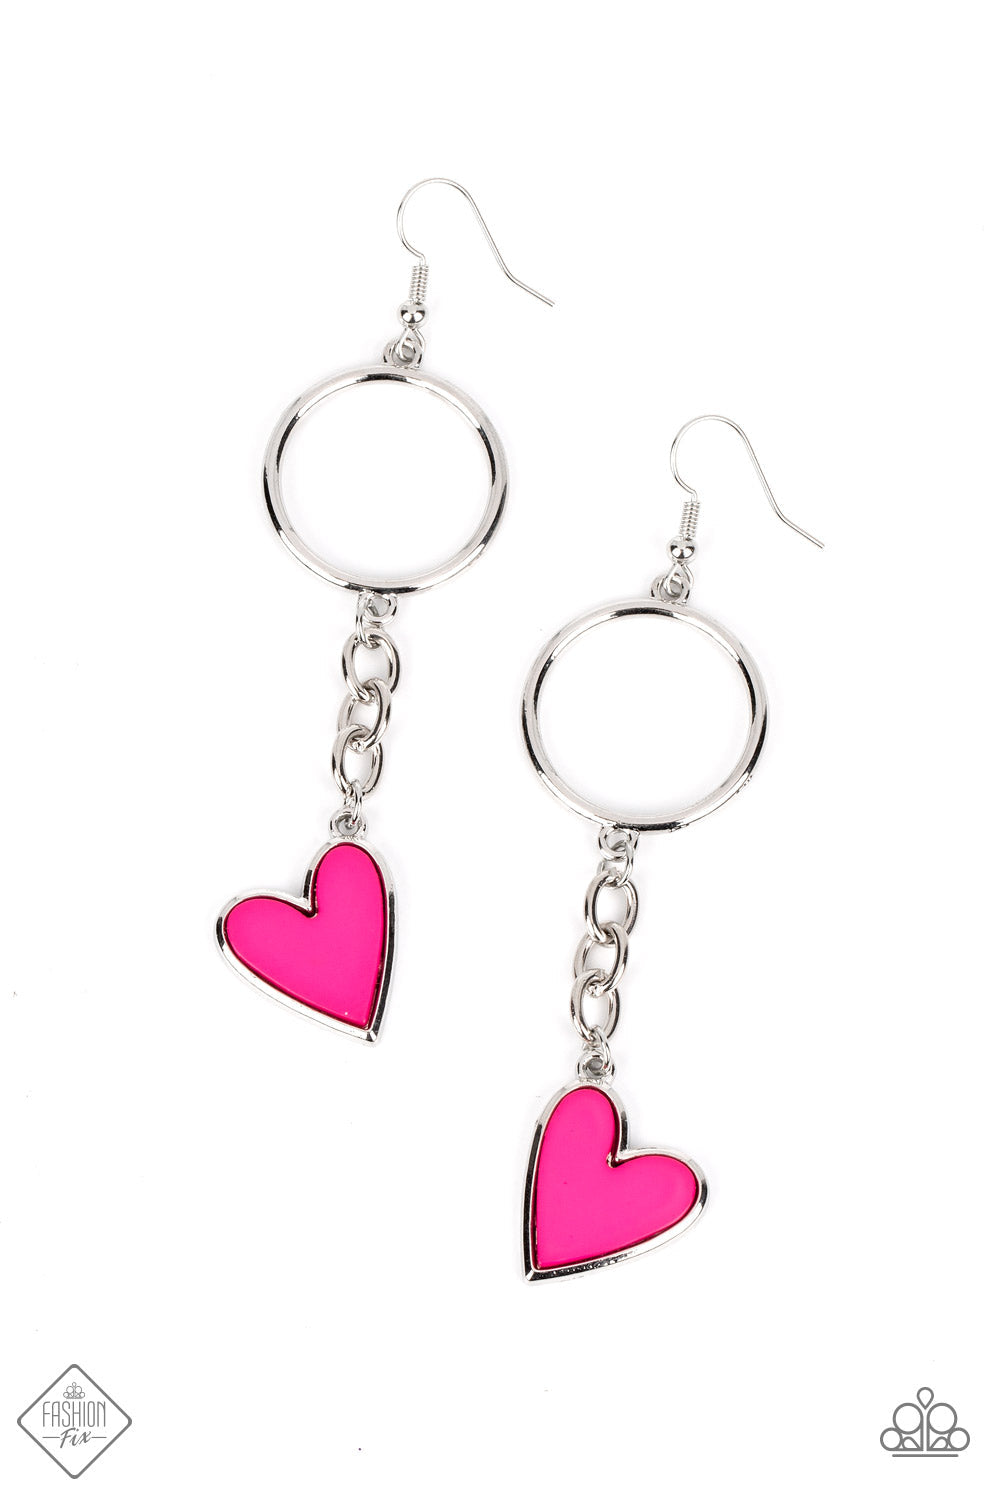 Don’t Miss a HEARTBEAT - Pink Heart Fashion Earrings - Paparazzi Accessories - A vibrant pink heart, set atop a silver backing, swings from a strand of silver chain in a carefree cascade. A thick silver hoop anchors the pendant, adding a handcrafted touch to the design. Earring attaches to a standard fishhook fitting. - Trendy fashion jewelry for everyone -